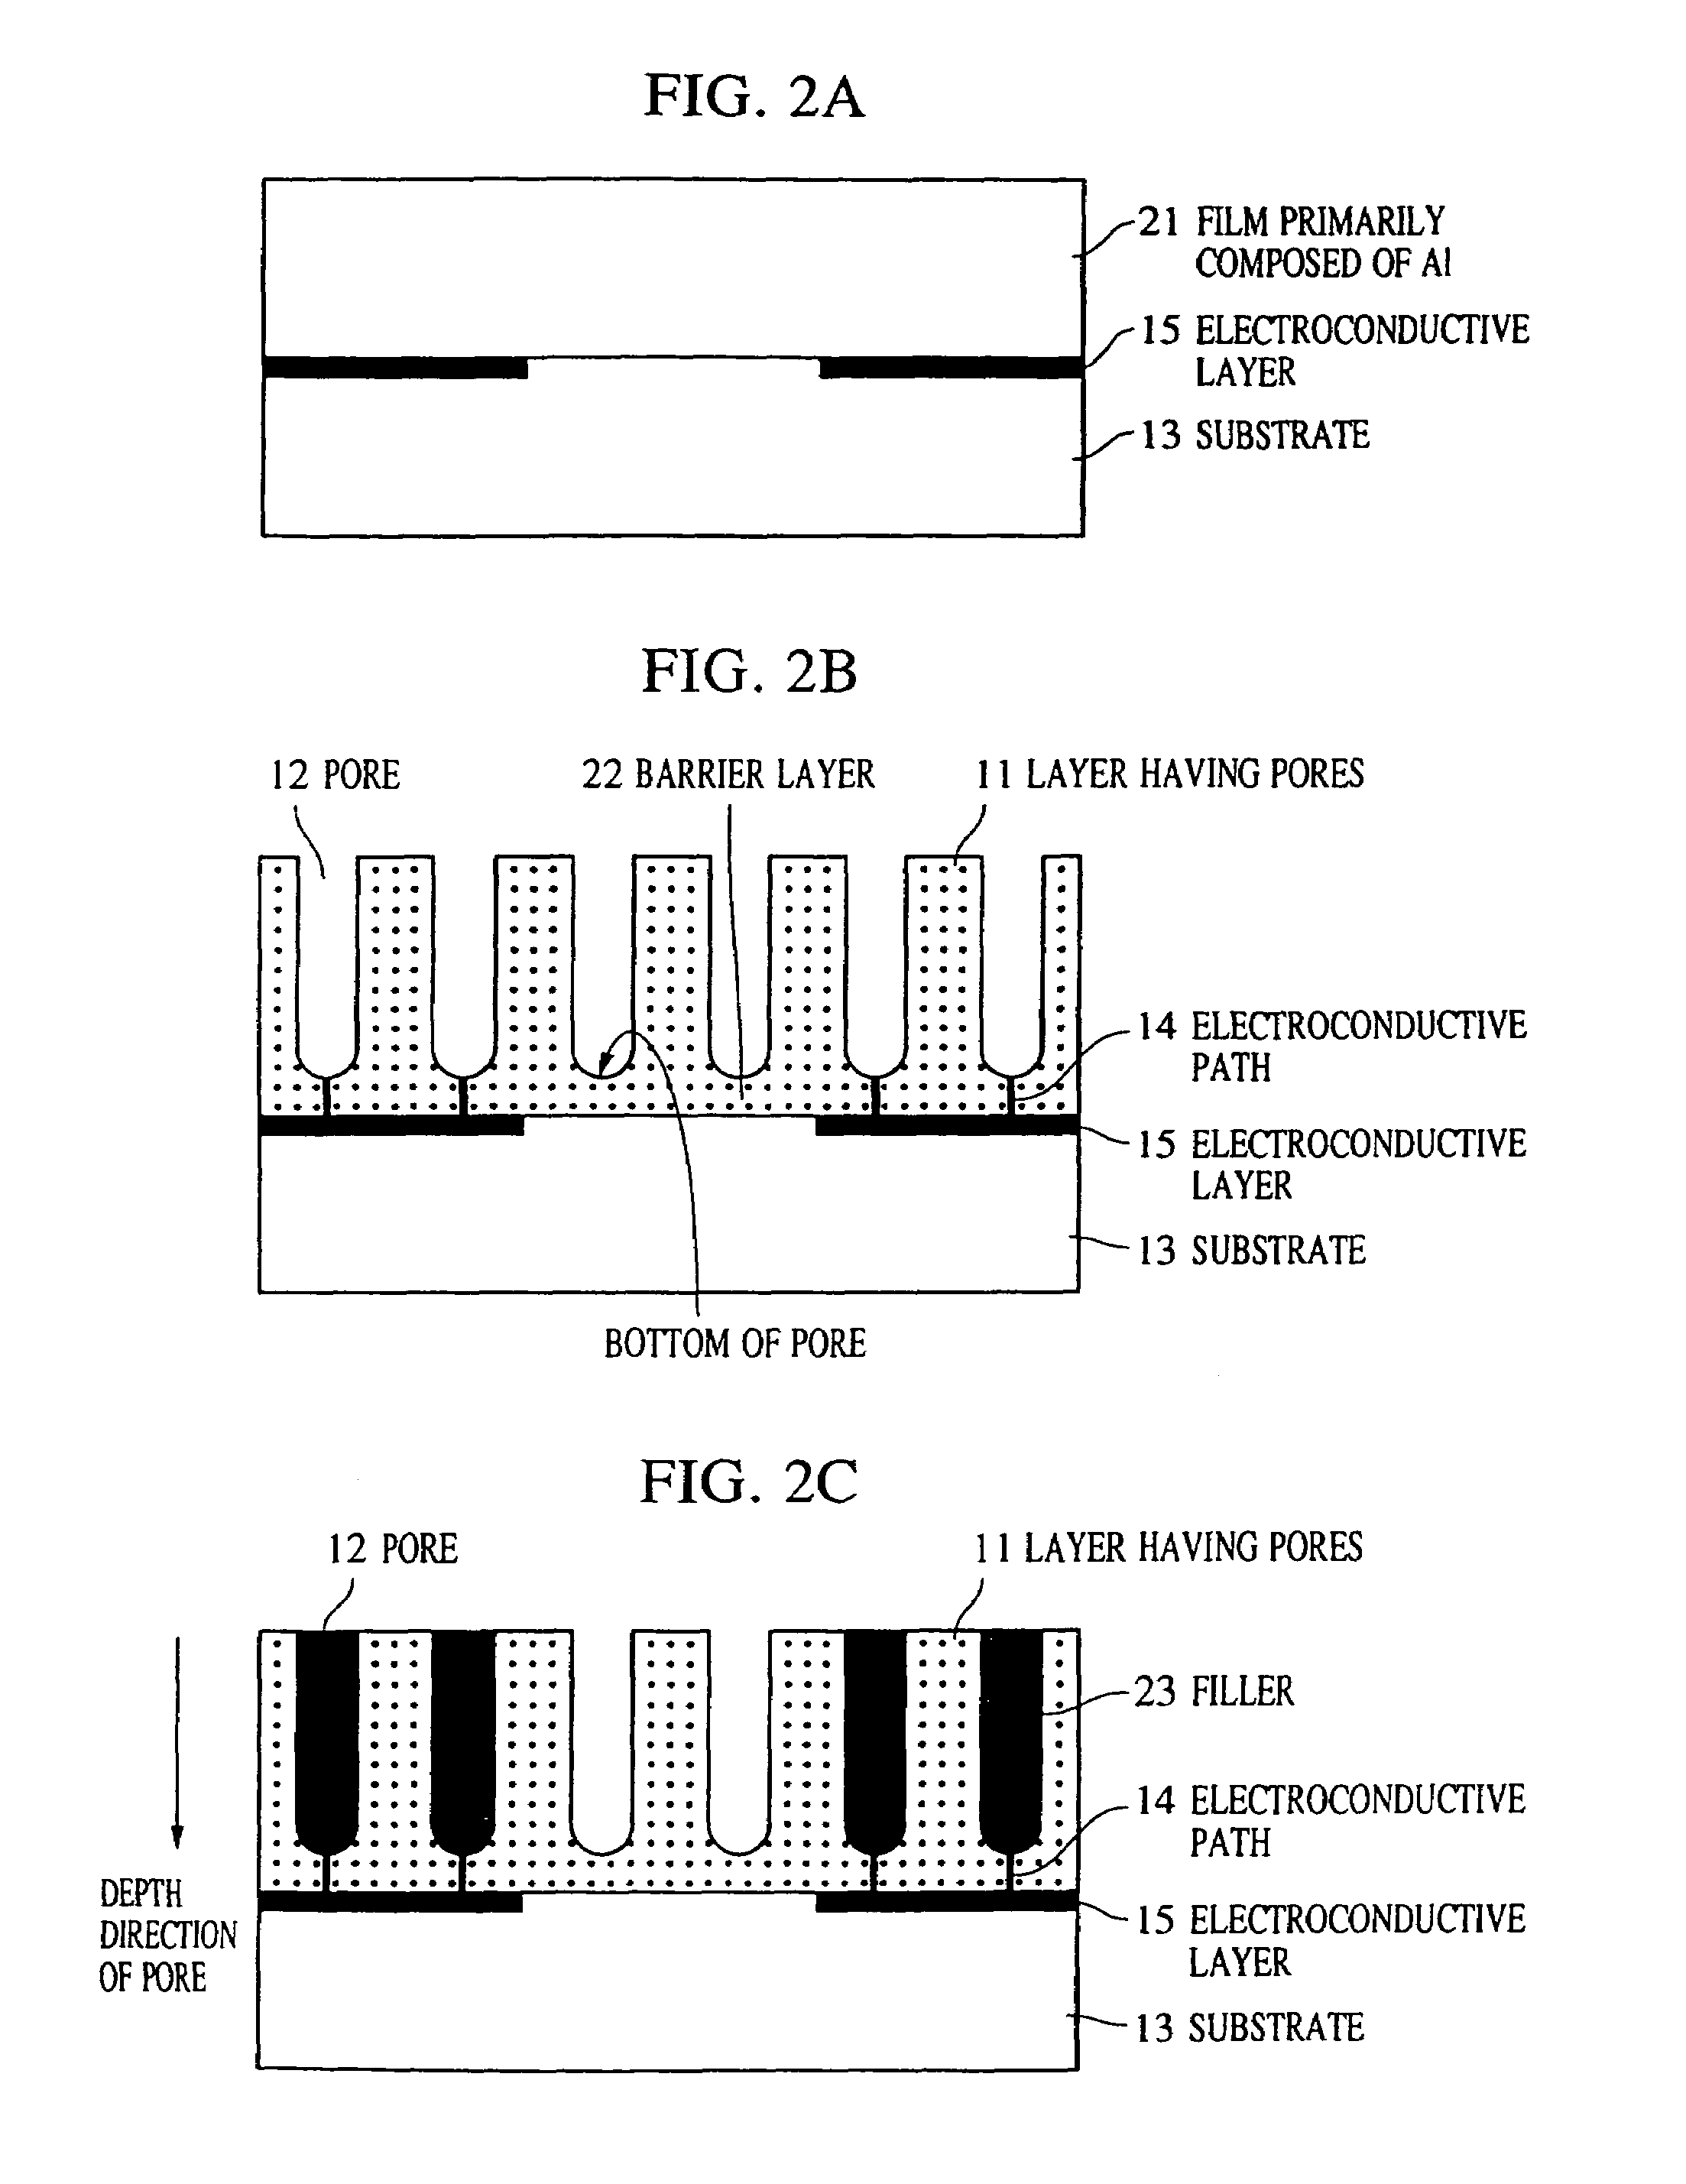 Structure having pores, device using the same, and manufacturing methods therefor